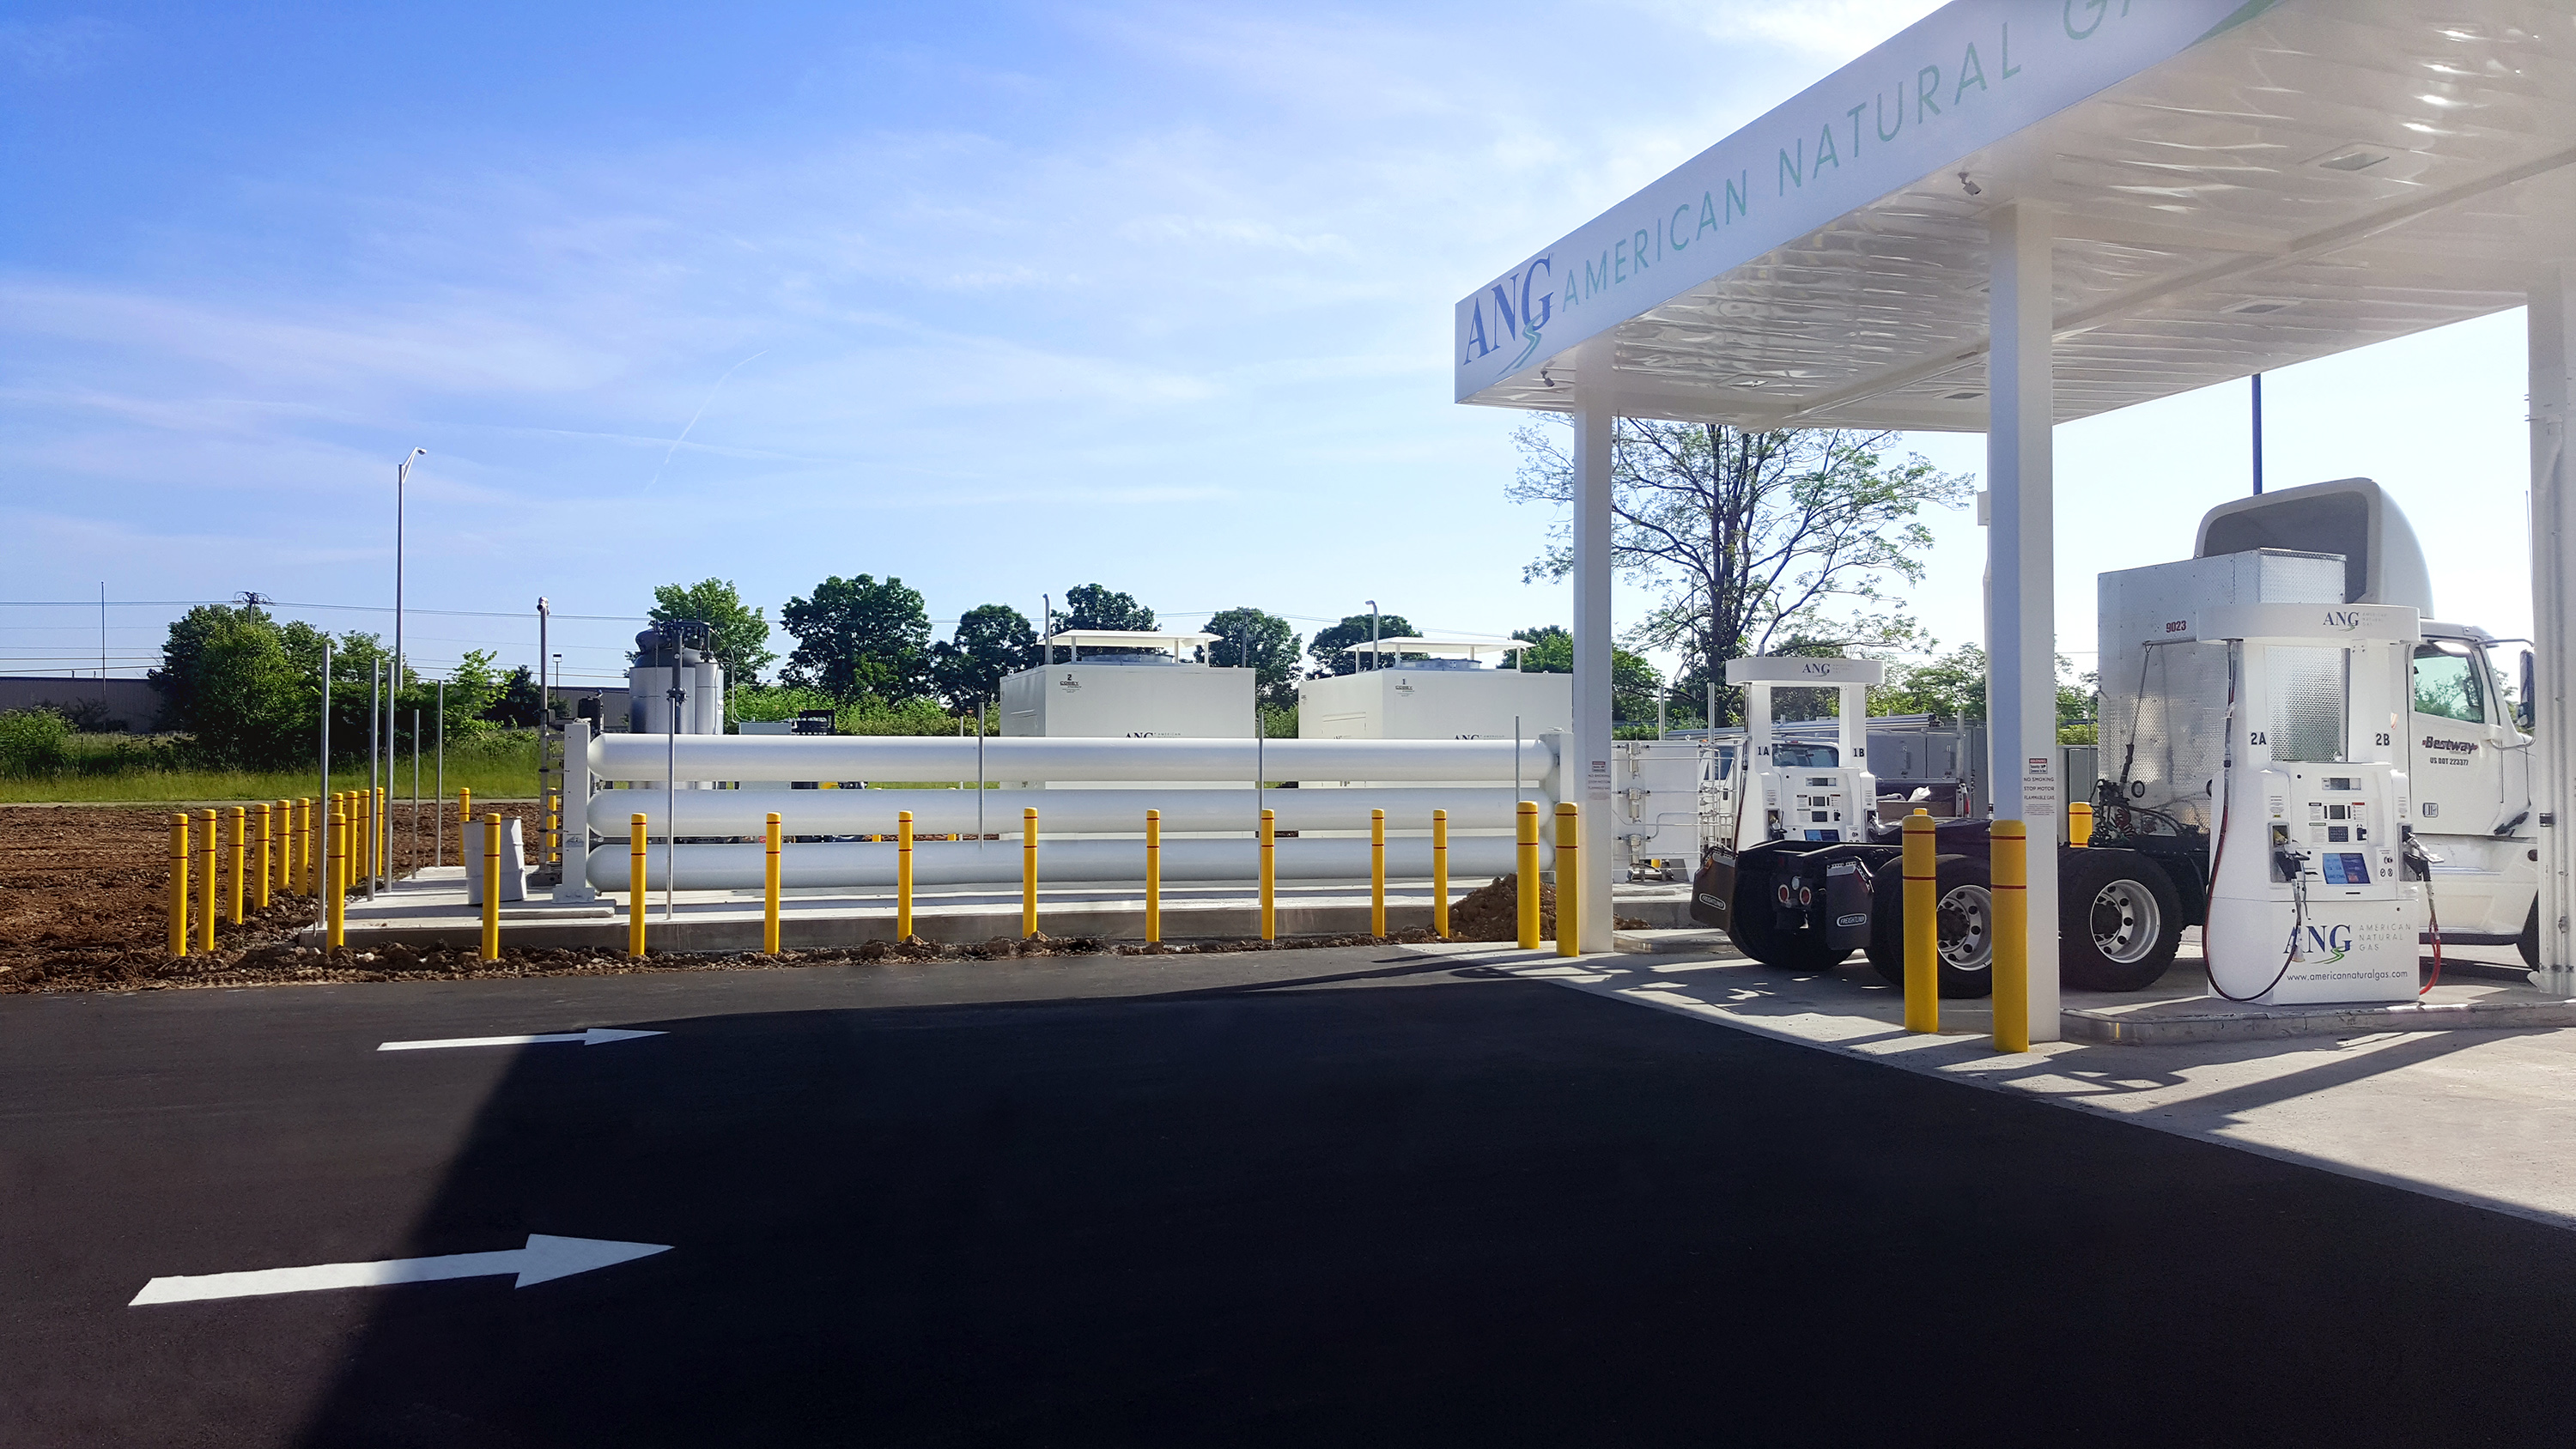 ANG Opens first public CNG station in Georgetown, Kentucky